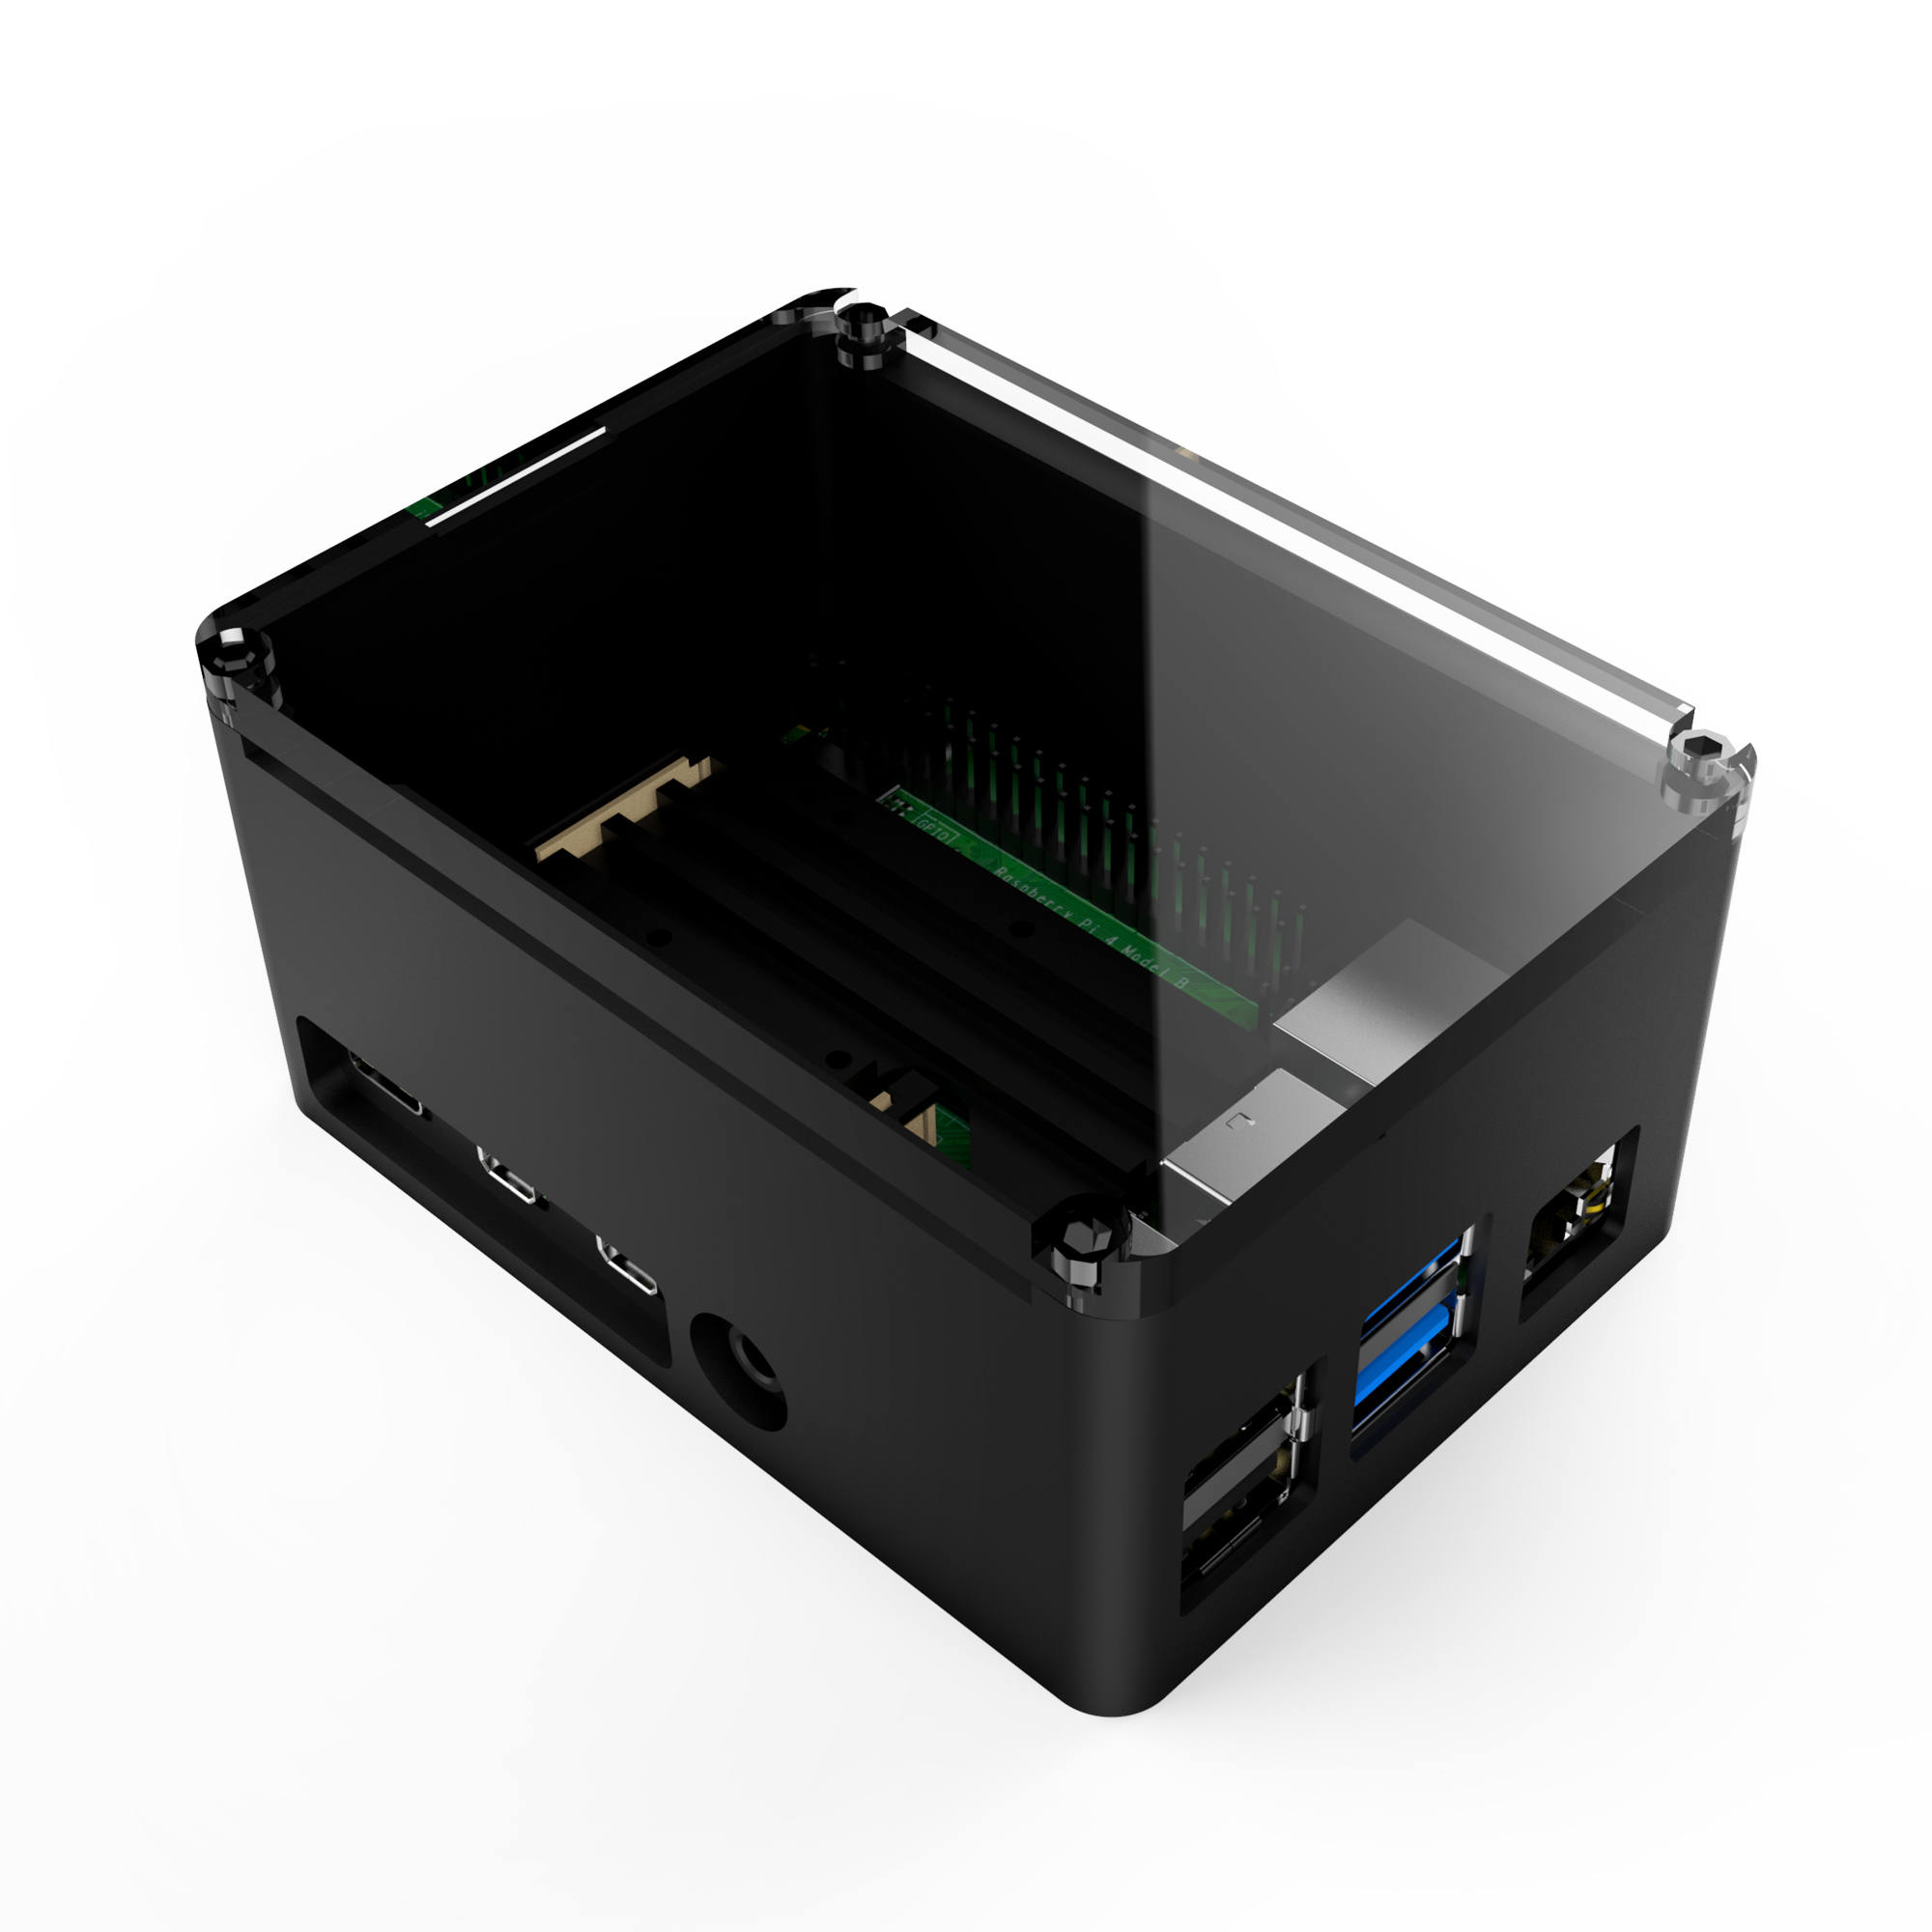 http://anidees.com/wp-content/uploads/2021/07/anidees-Raspberry-Pi-4-Case-PRO-H-2000-01.jpg